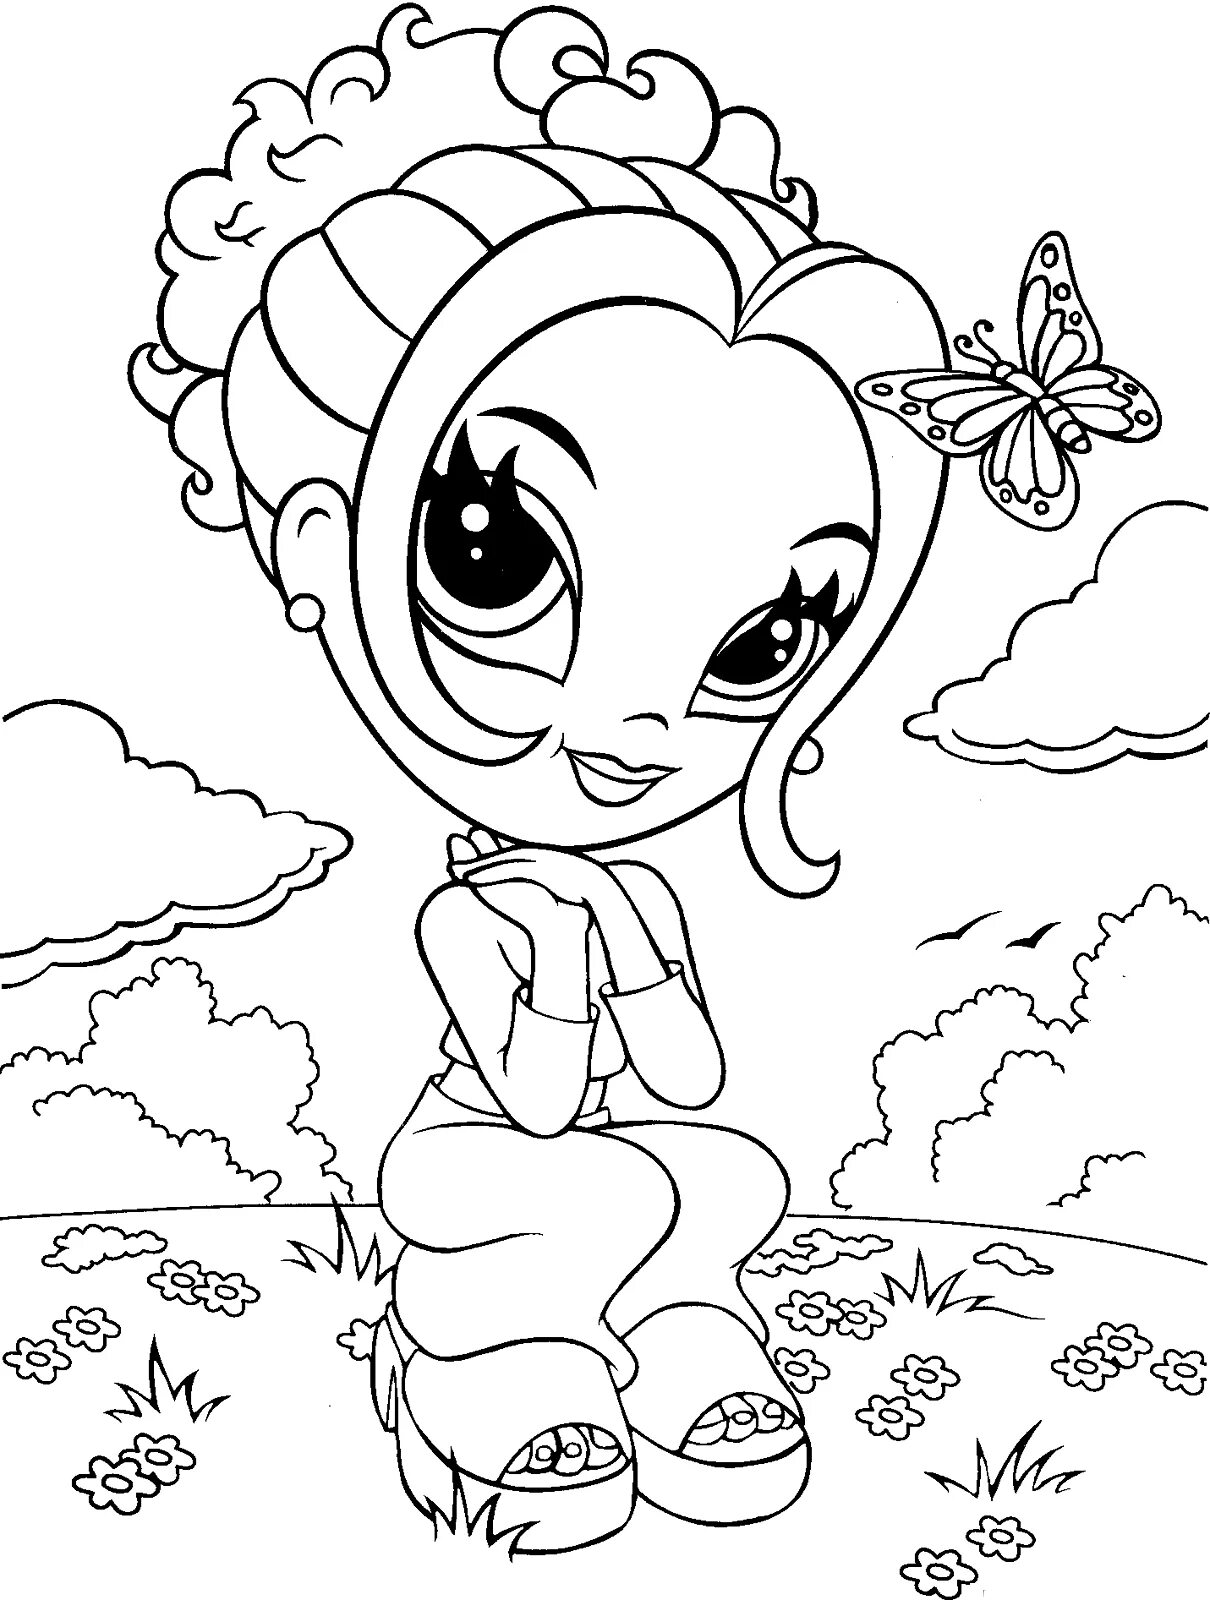 A unique coloring book popular with children